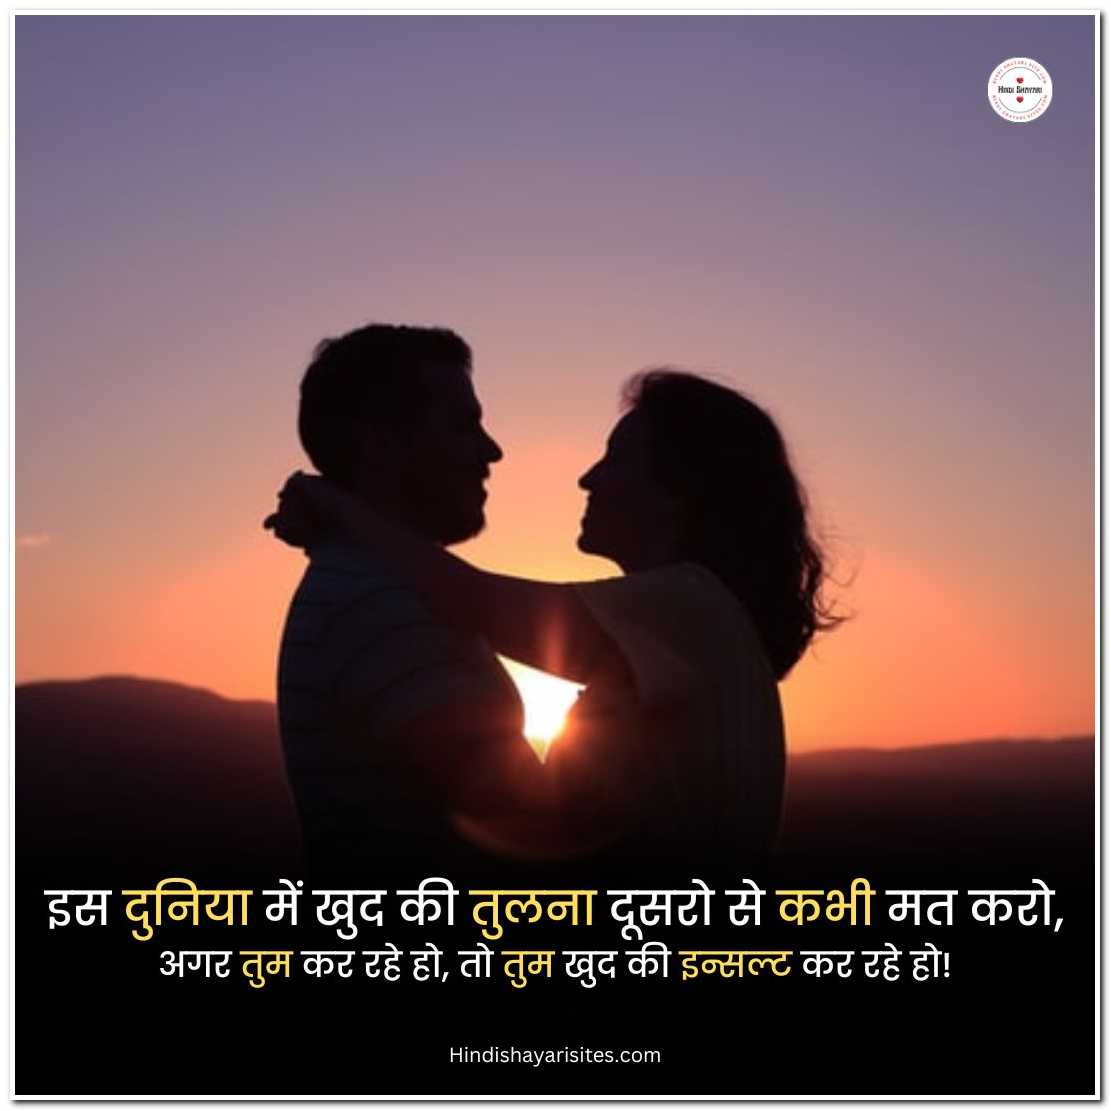 Self Motivation Self Respect Quotes In Hindi